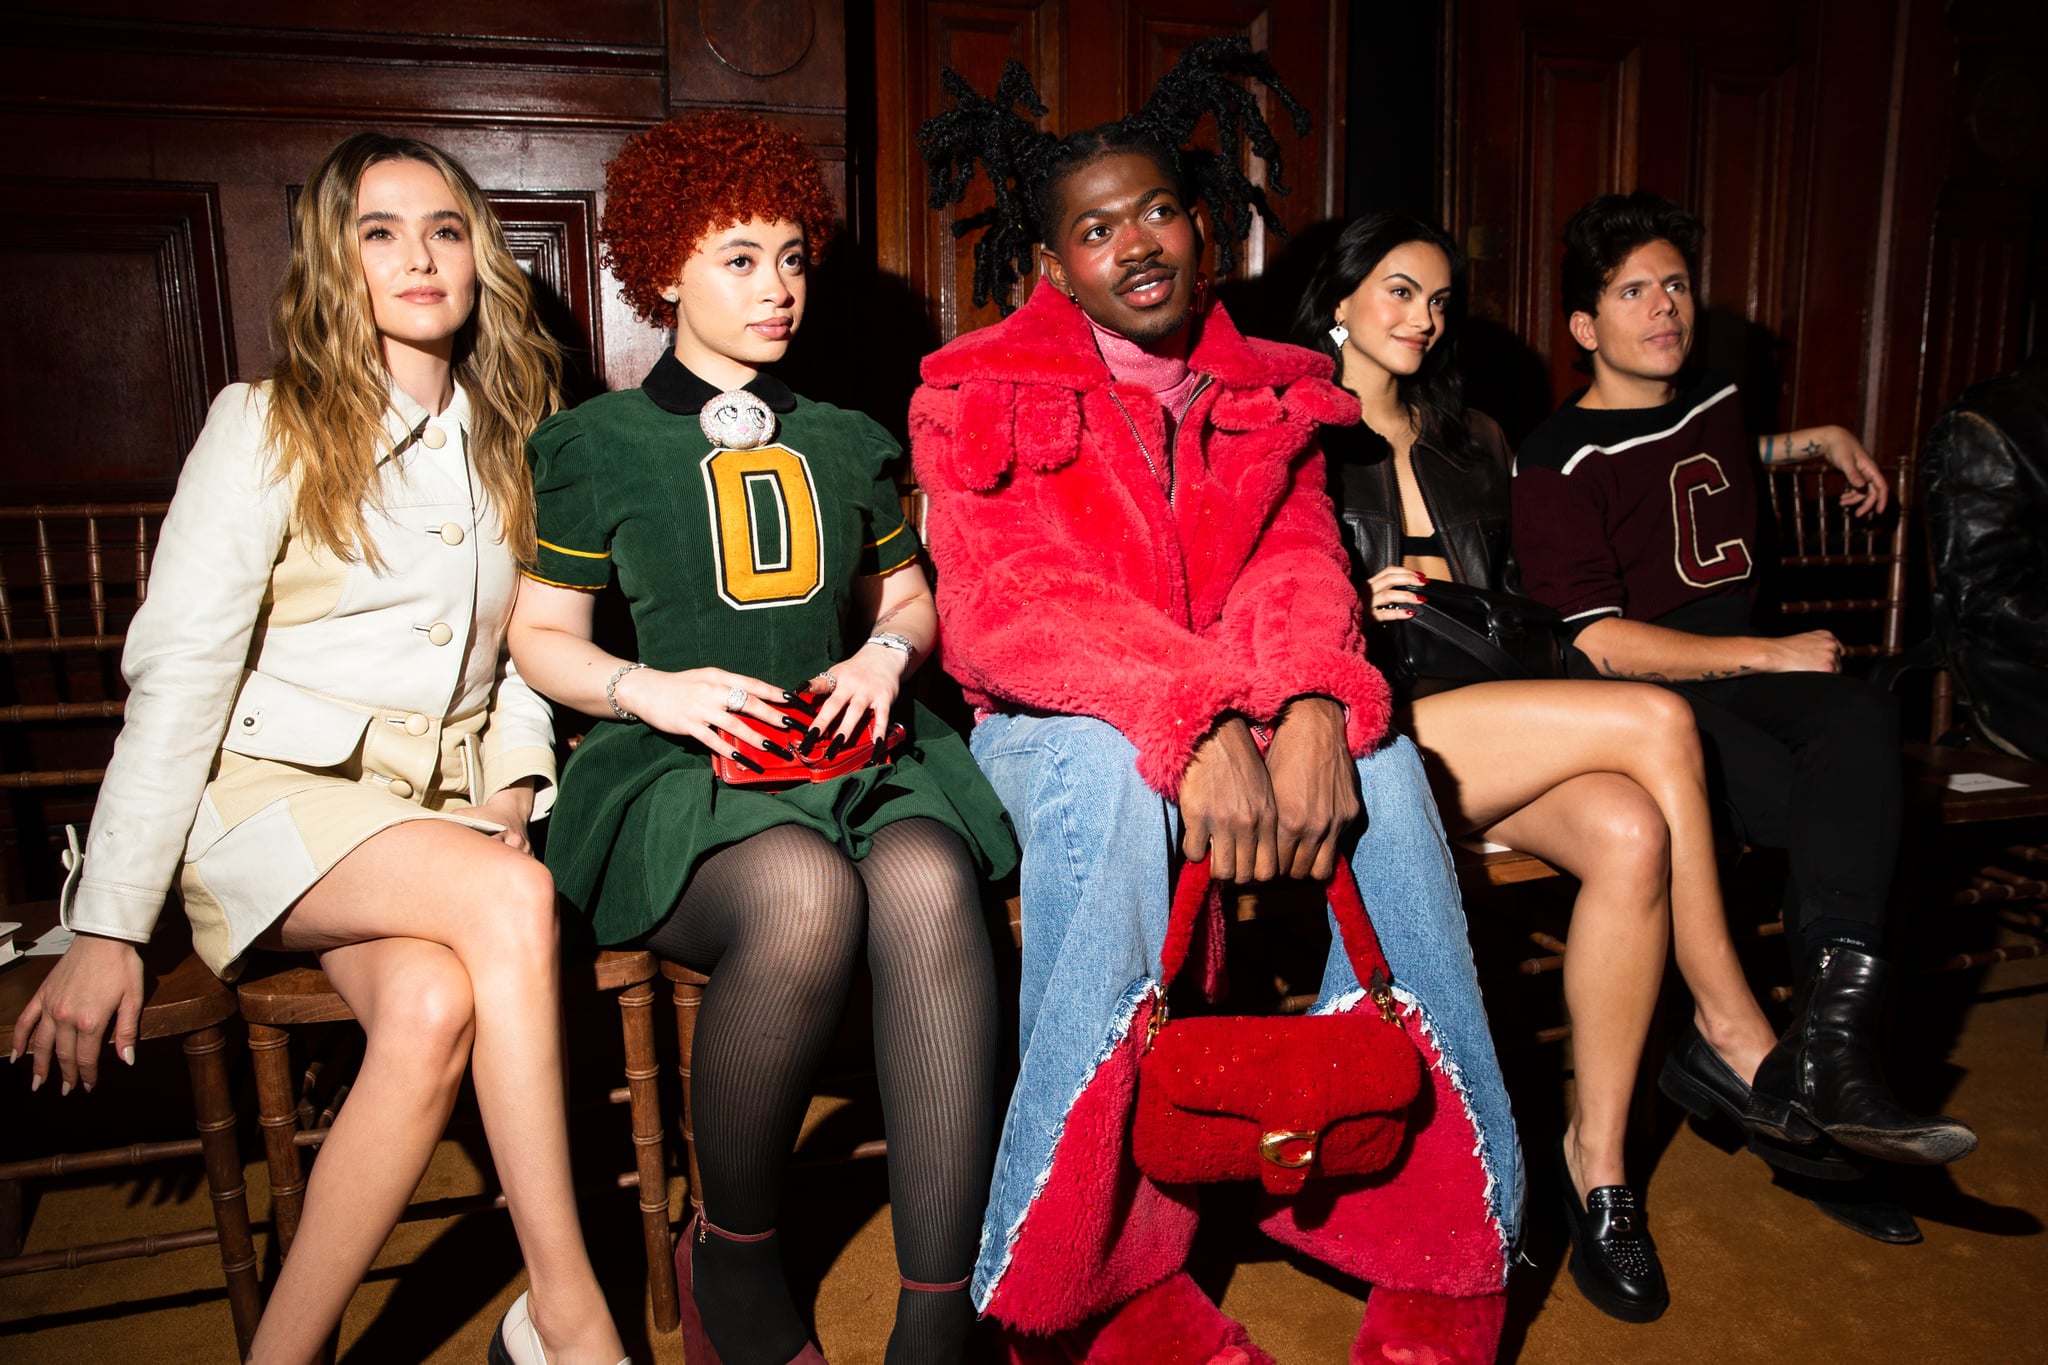 Zoey Deutch, Ice Spice, Lil Nas X, Camila Mendes and Rudy Mancuso in the front row at Coach Fall 2023 Ready To Wear Fashion Show at Park Avenue Armory on February 13, 2023 in New York, New York. (Photo by Lexie Moreland/WWD via Getty Images)